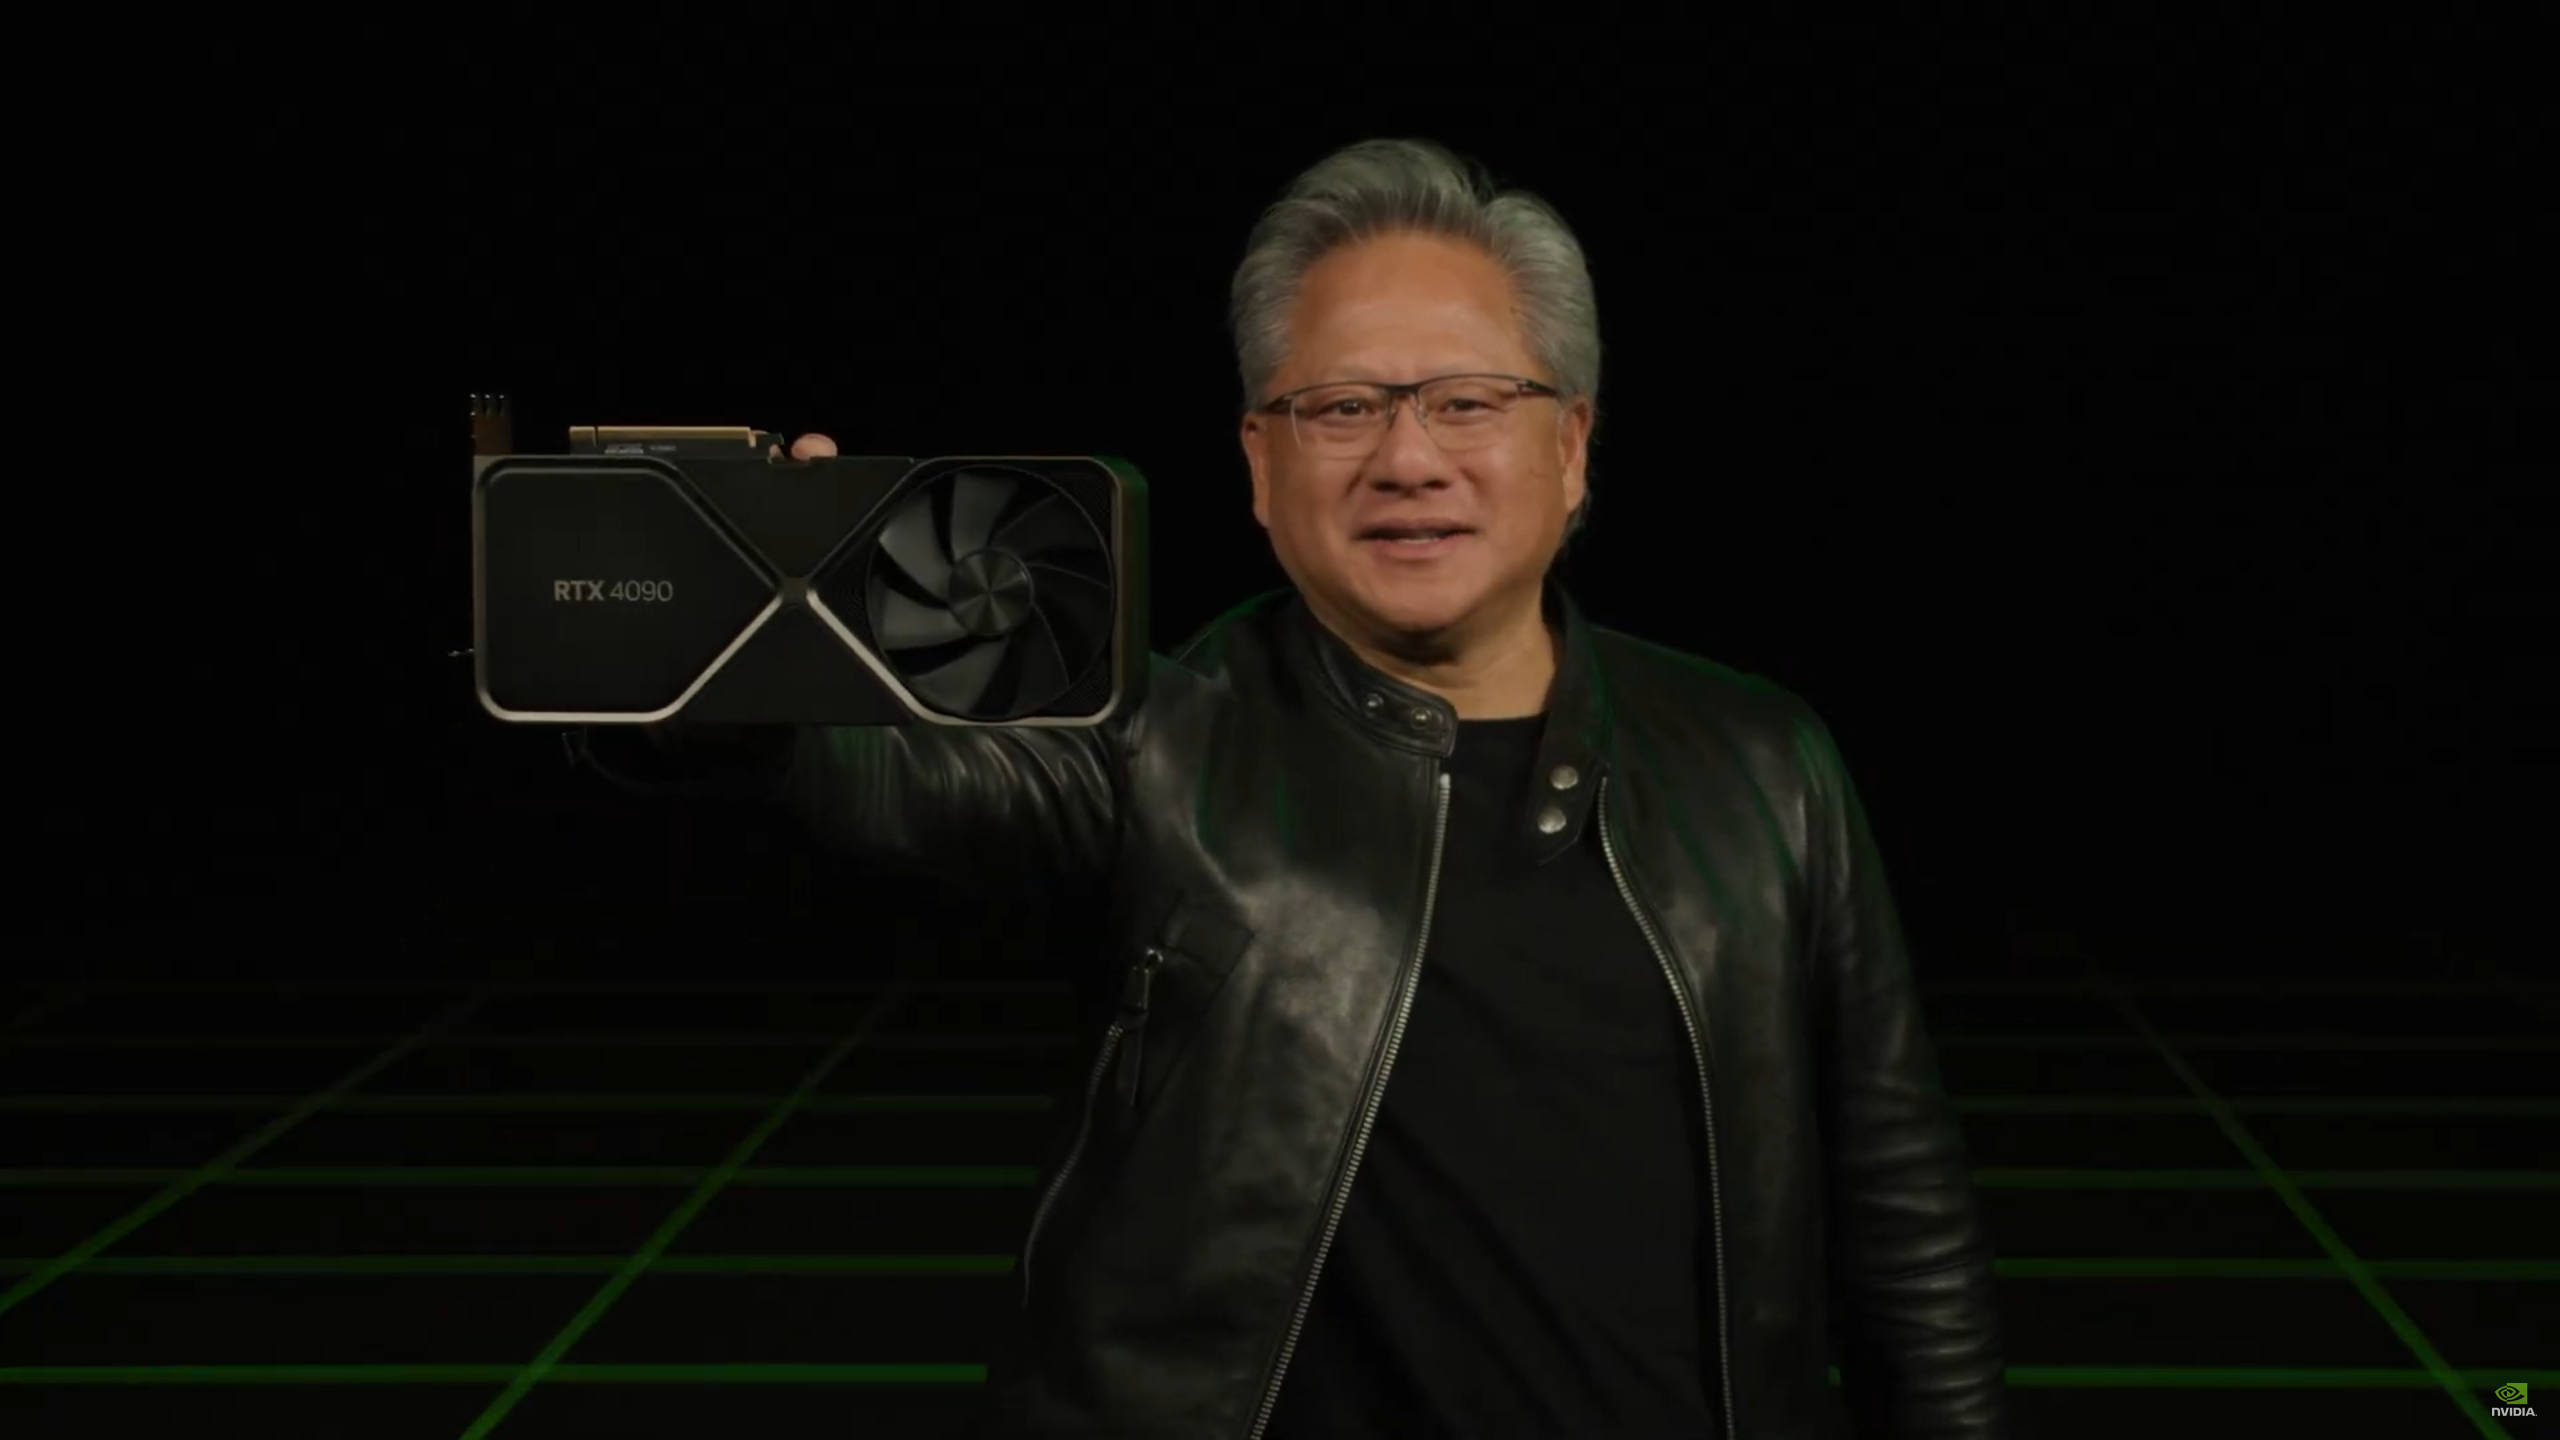 Nvidia CEO Jensen Huang holds up a GeForce RTX 4090 Founders Edition.